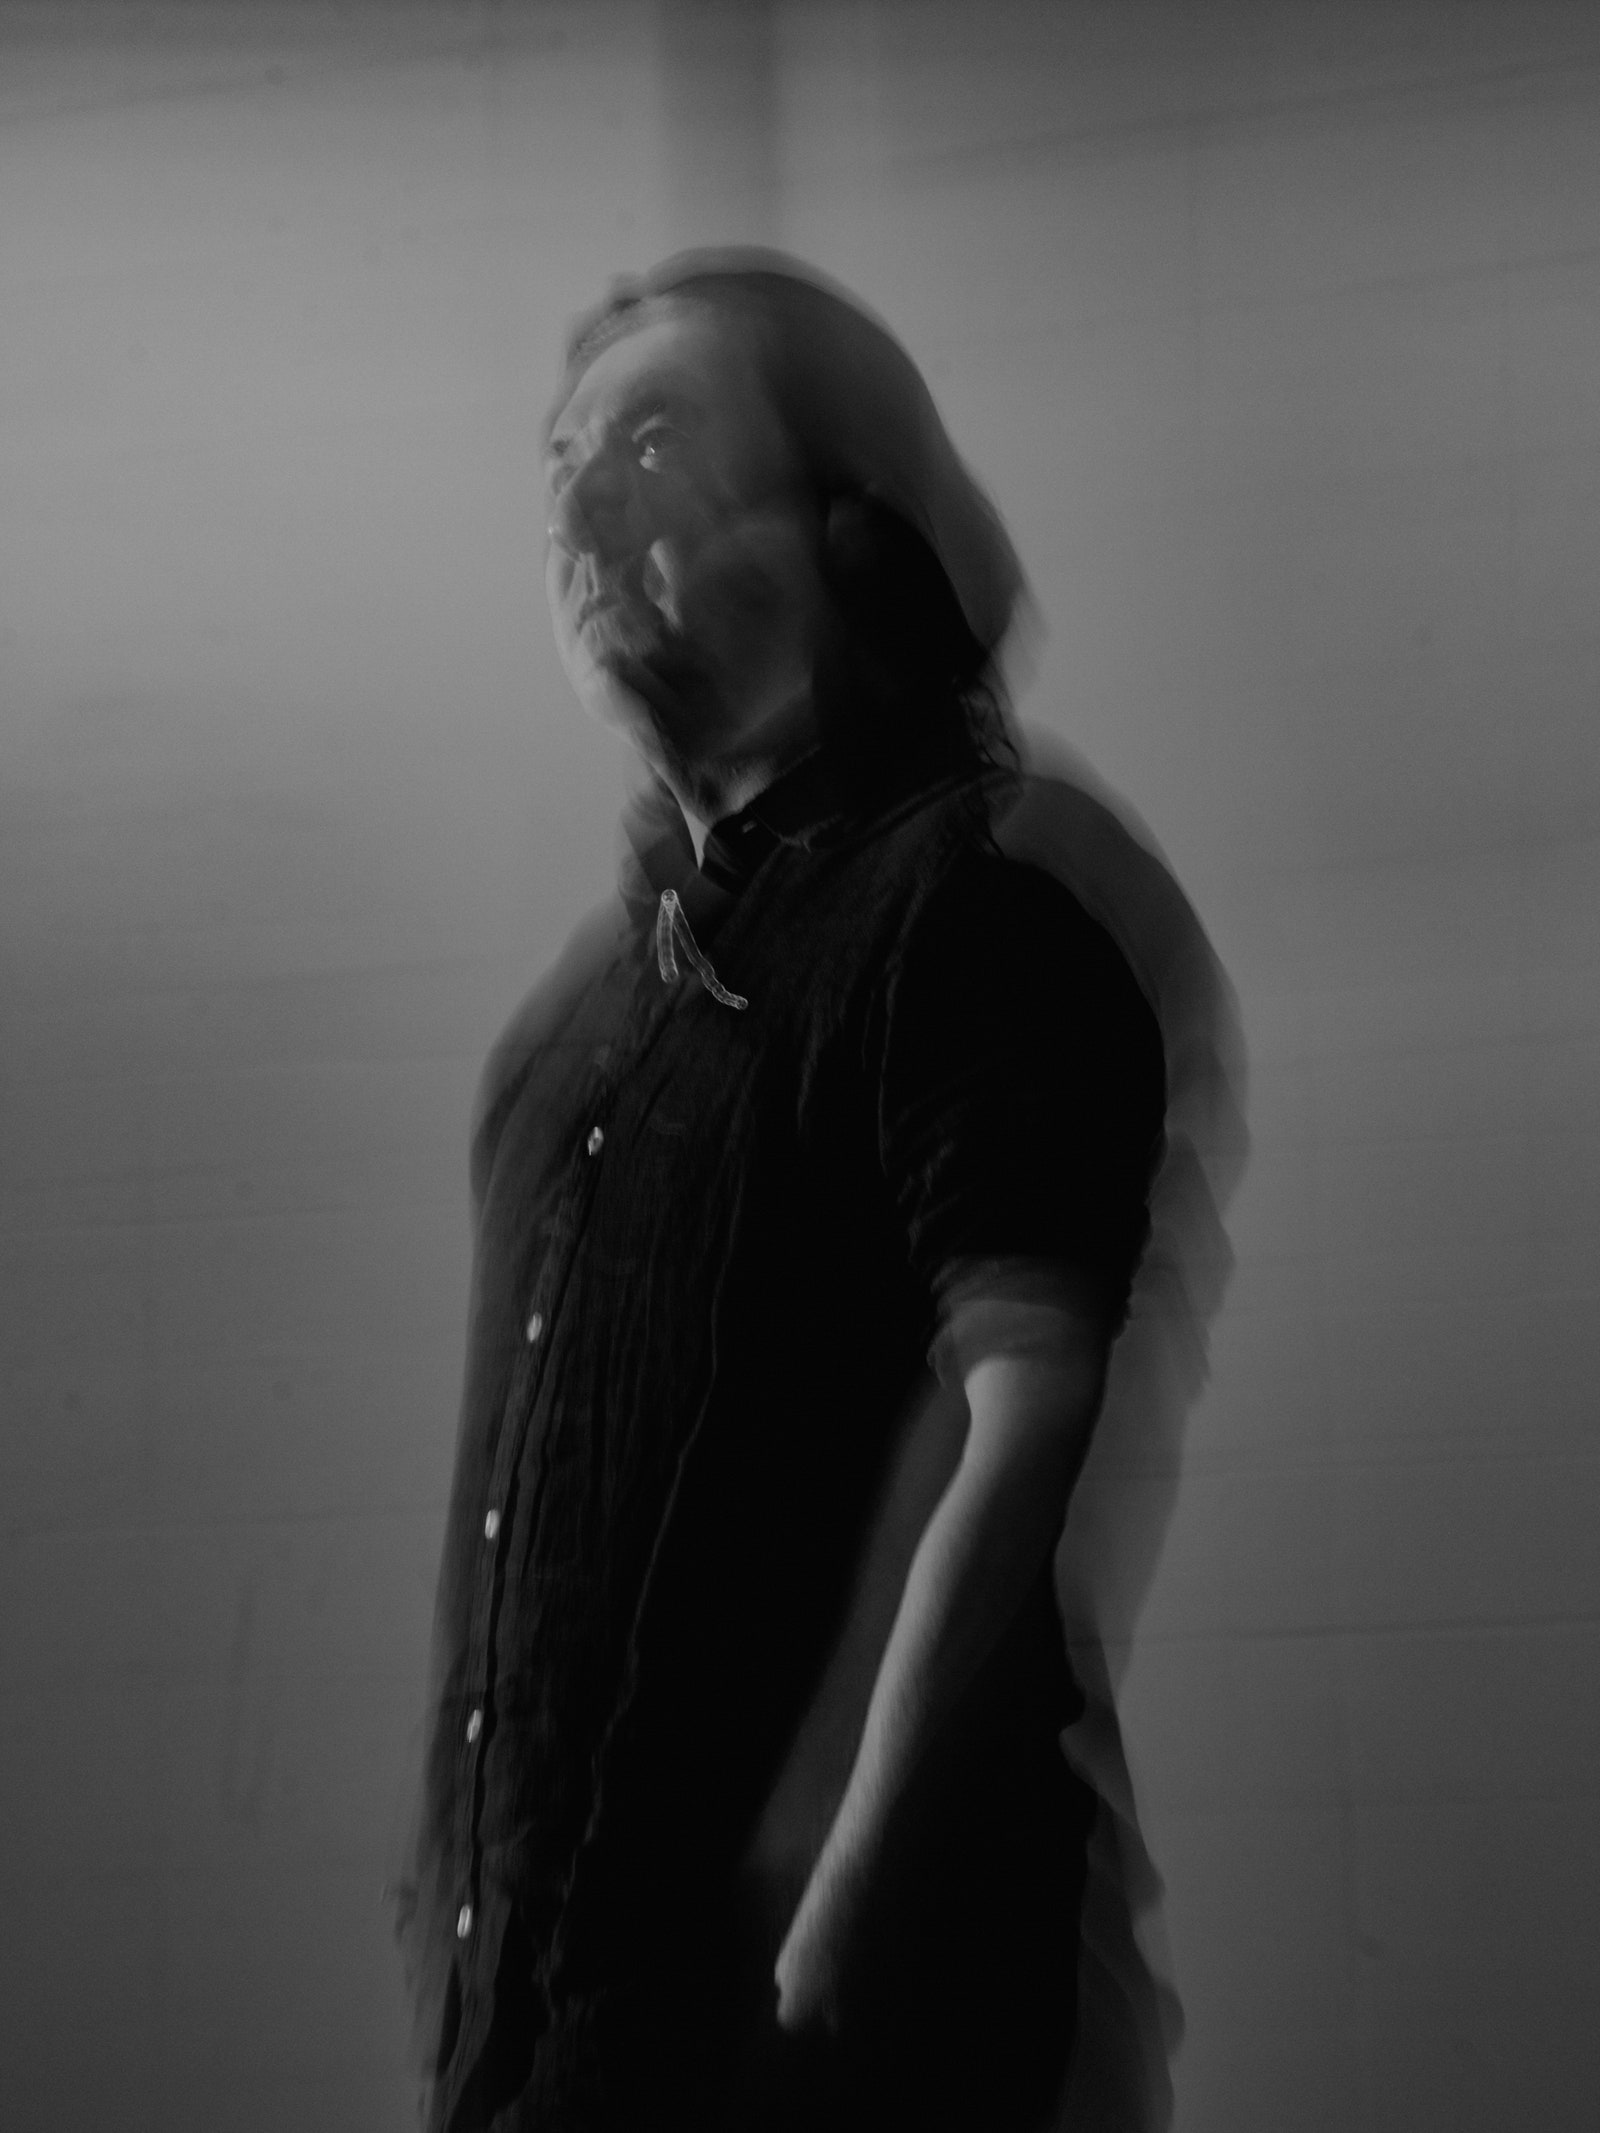 A black and white motion blur portrait of a person with long dark hair who is wearing a dark button up shirt